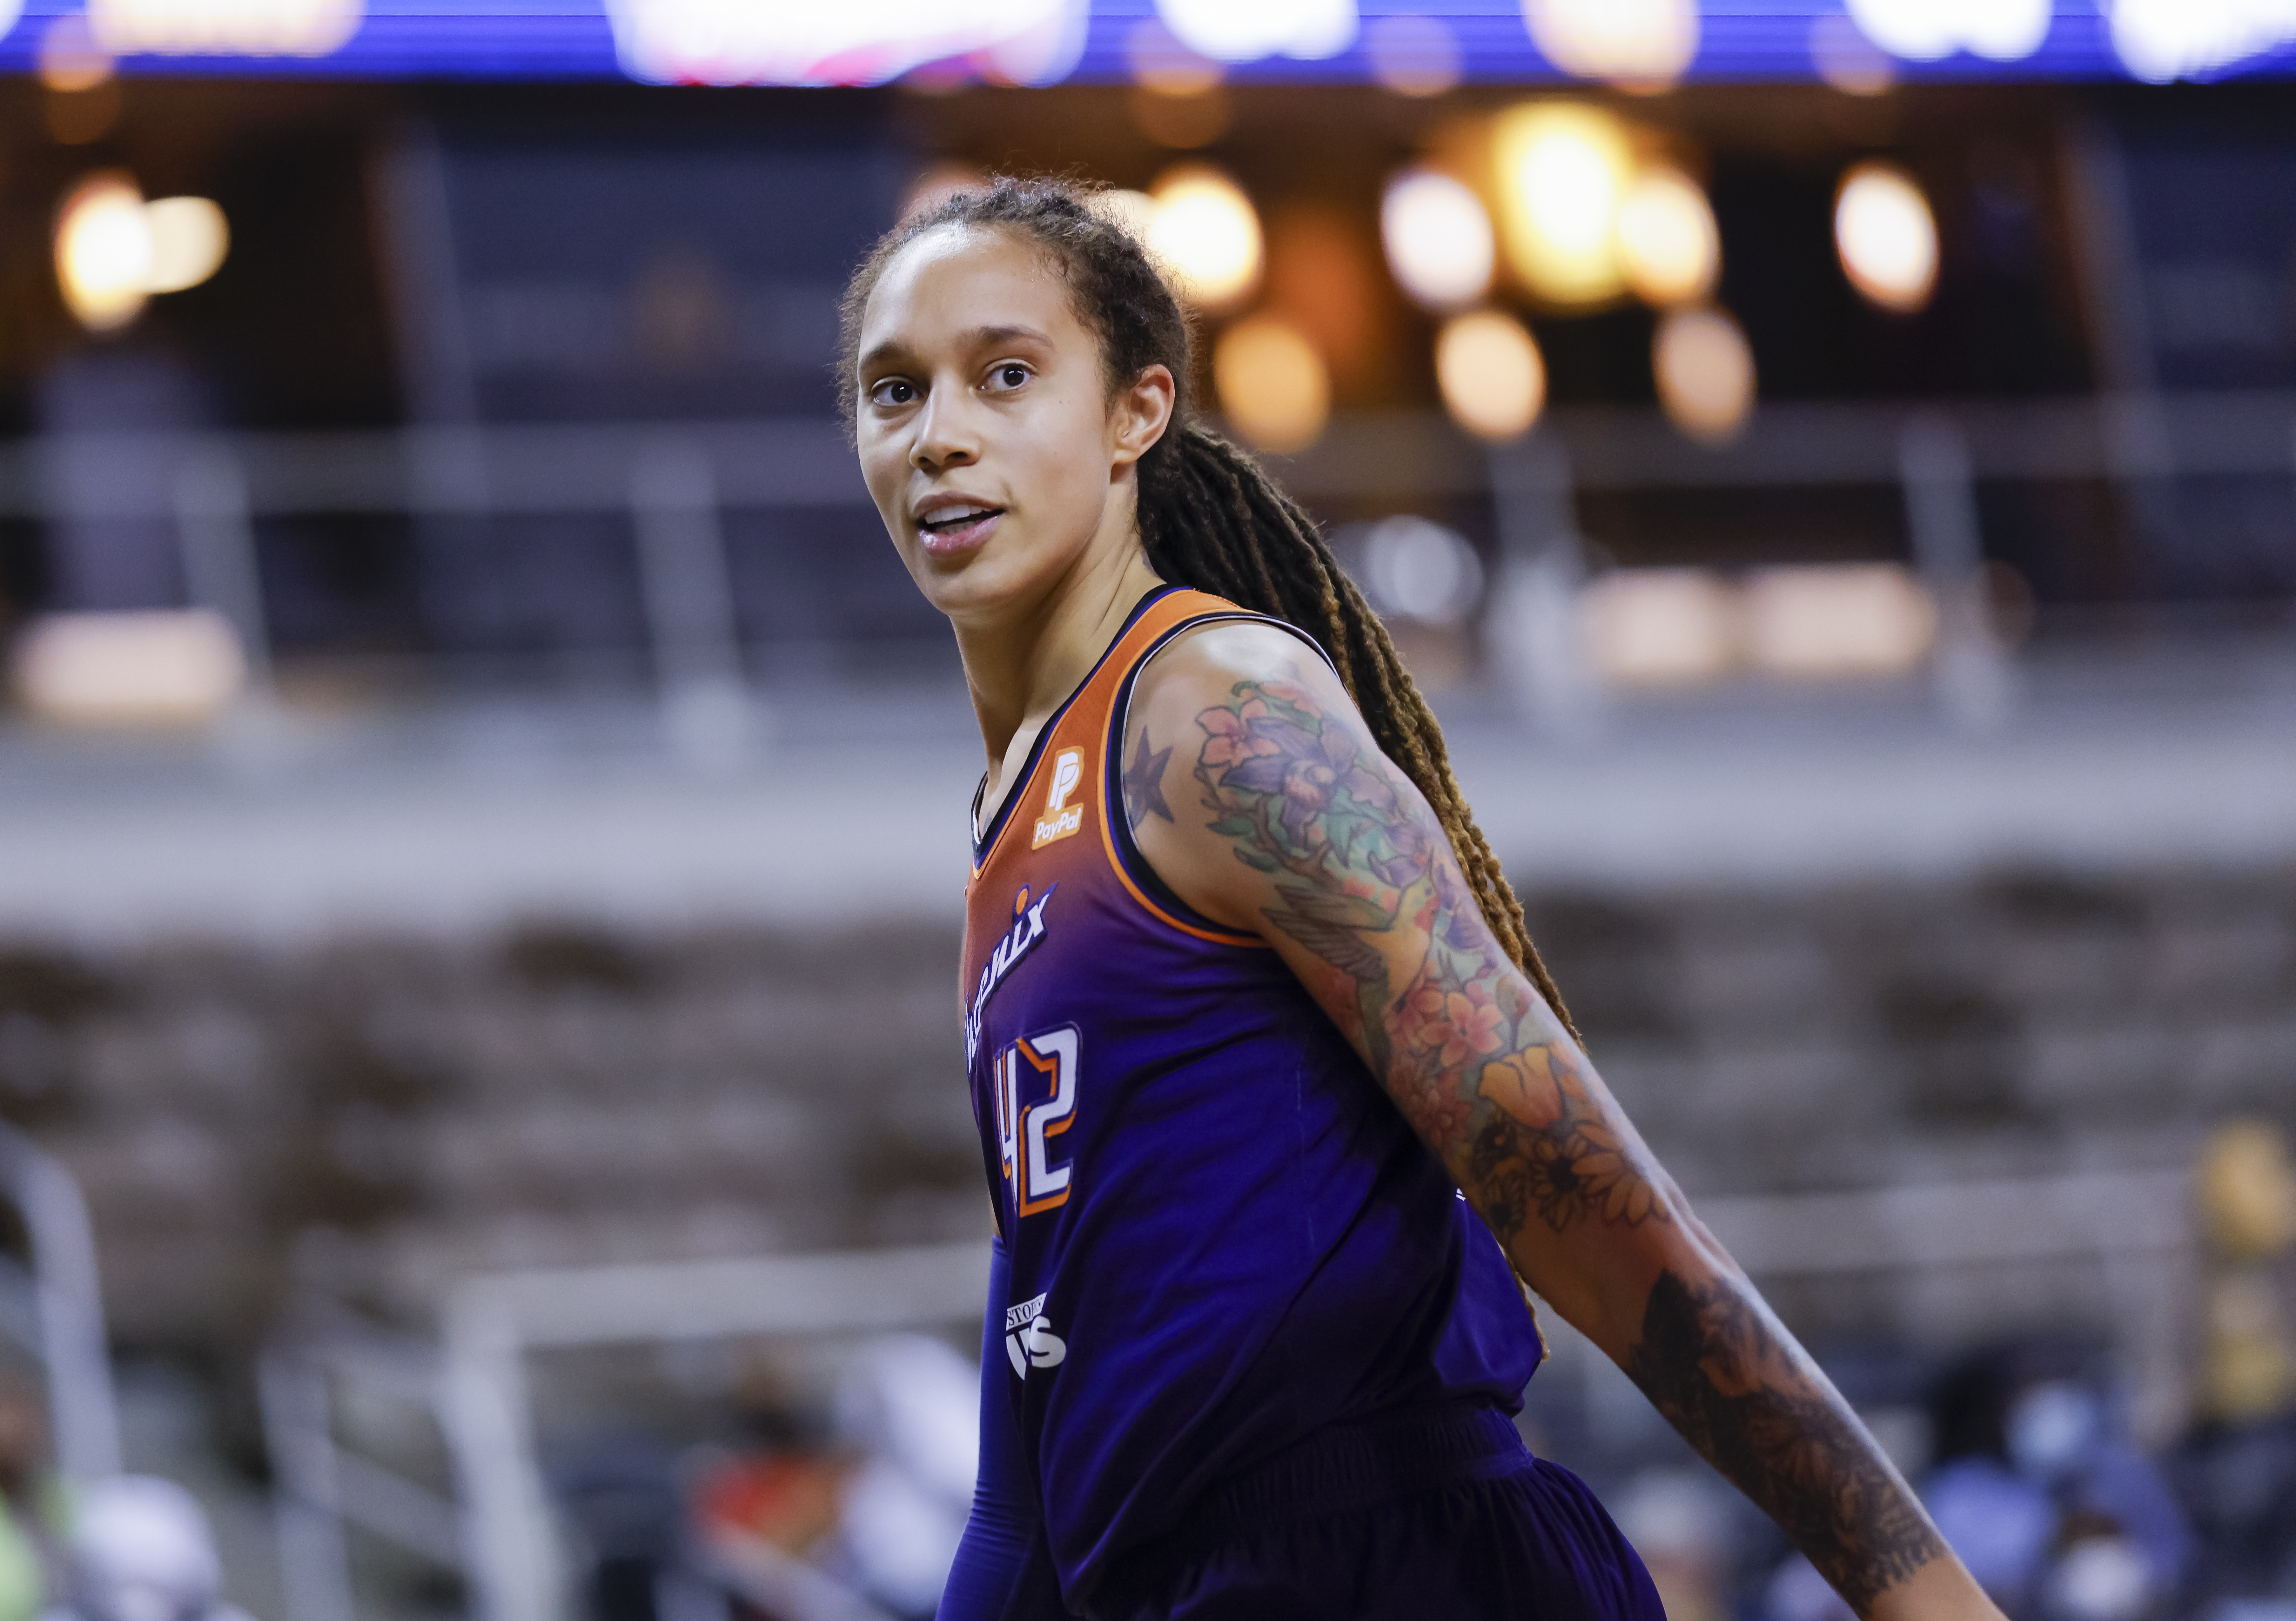 Brittney Griner of the Phoenix Mercury during the game against the Indiana Fever on September 6, 2021, in Indianapolis, Indiana. | Source: Getty Images